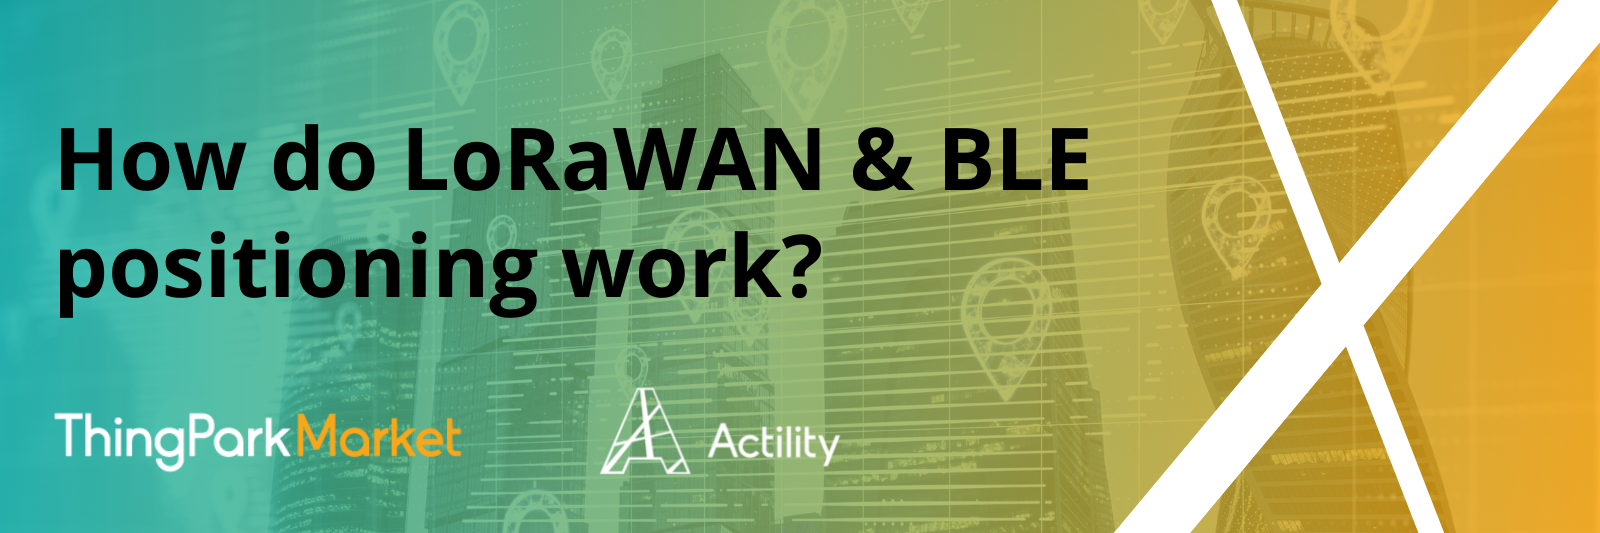 How do LoRaWAN & BLE positioning work?